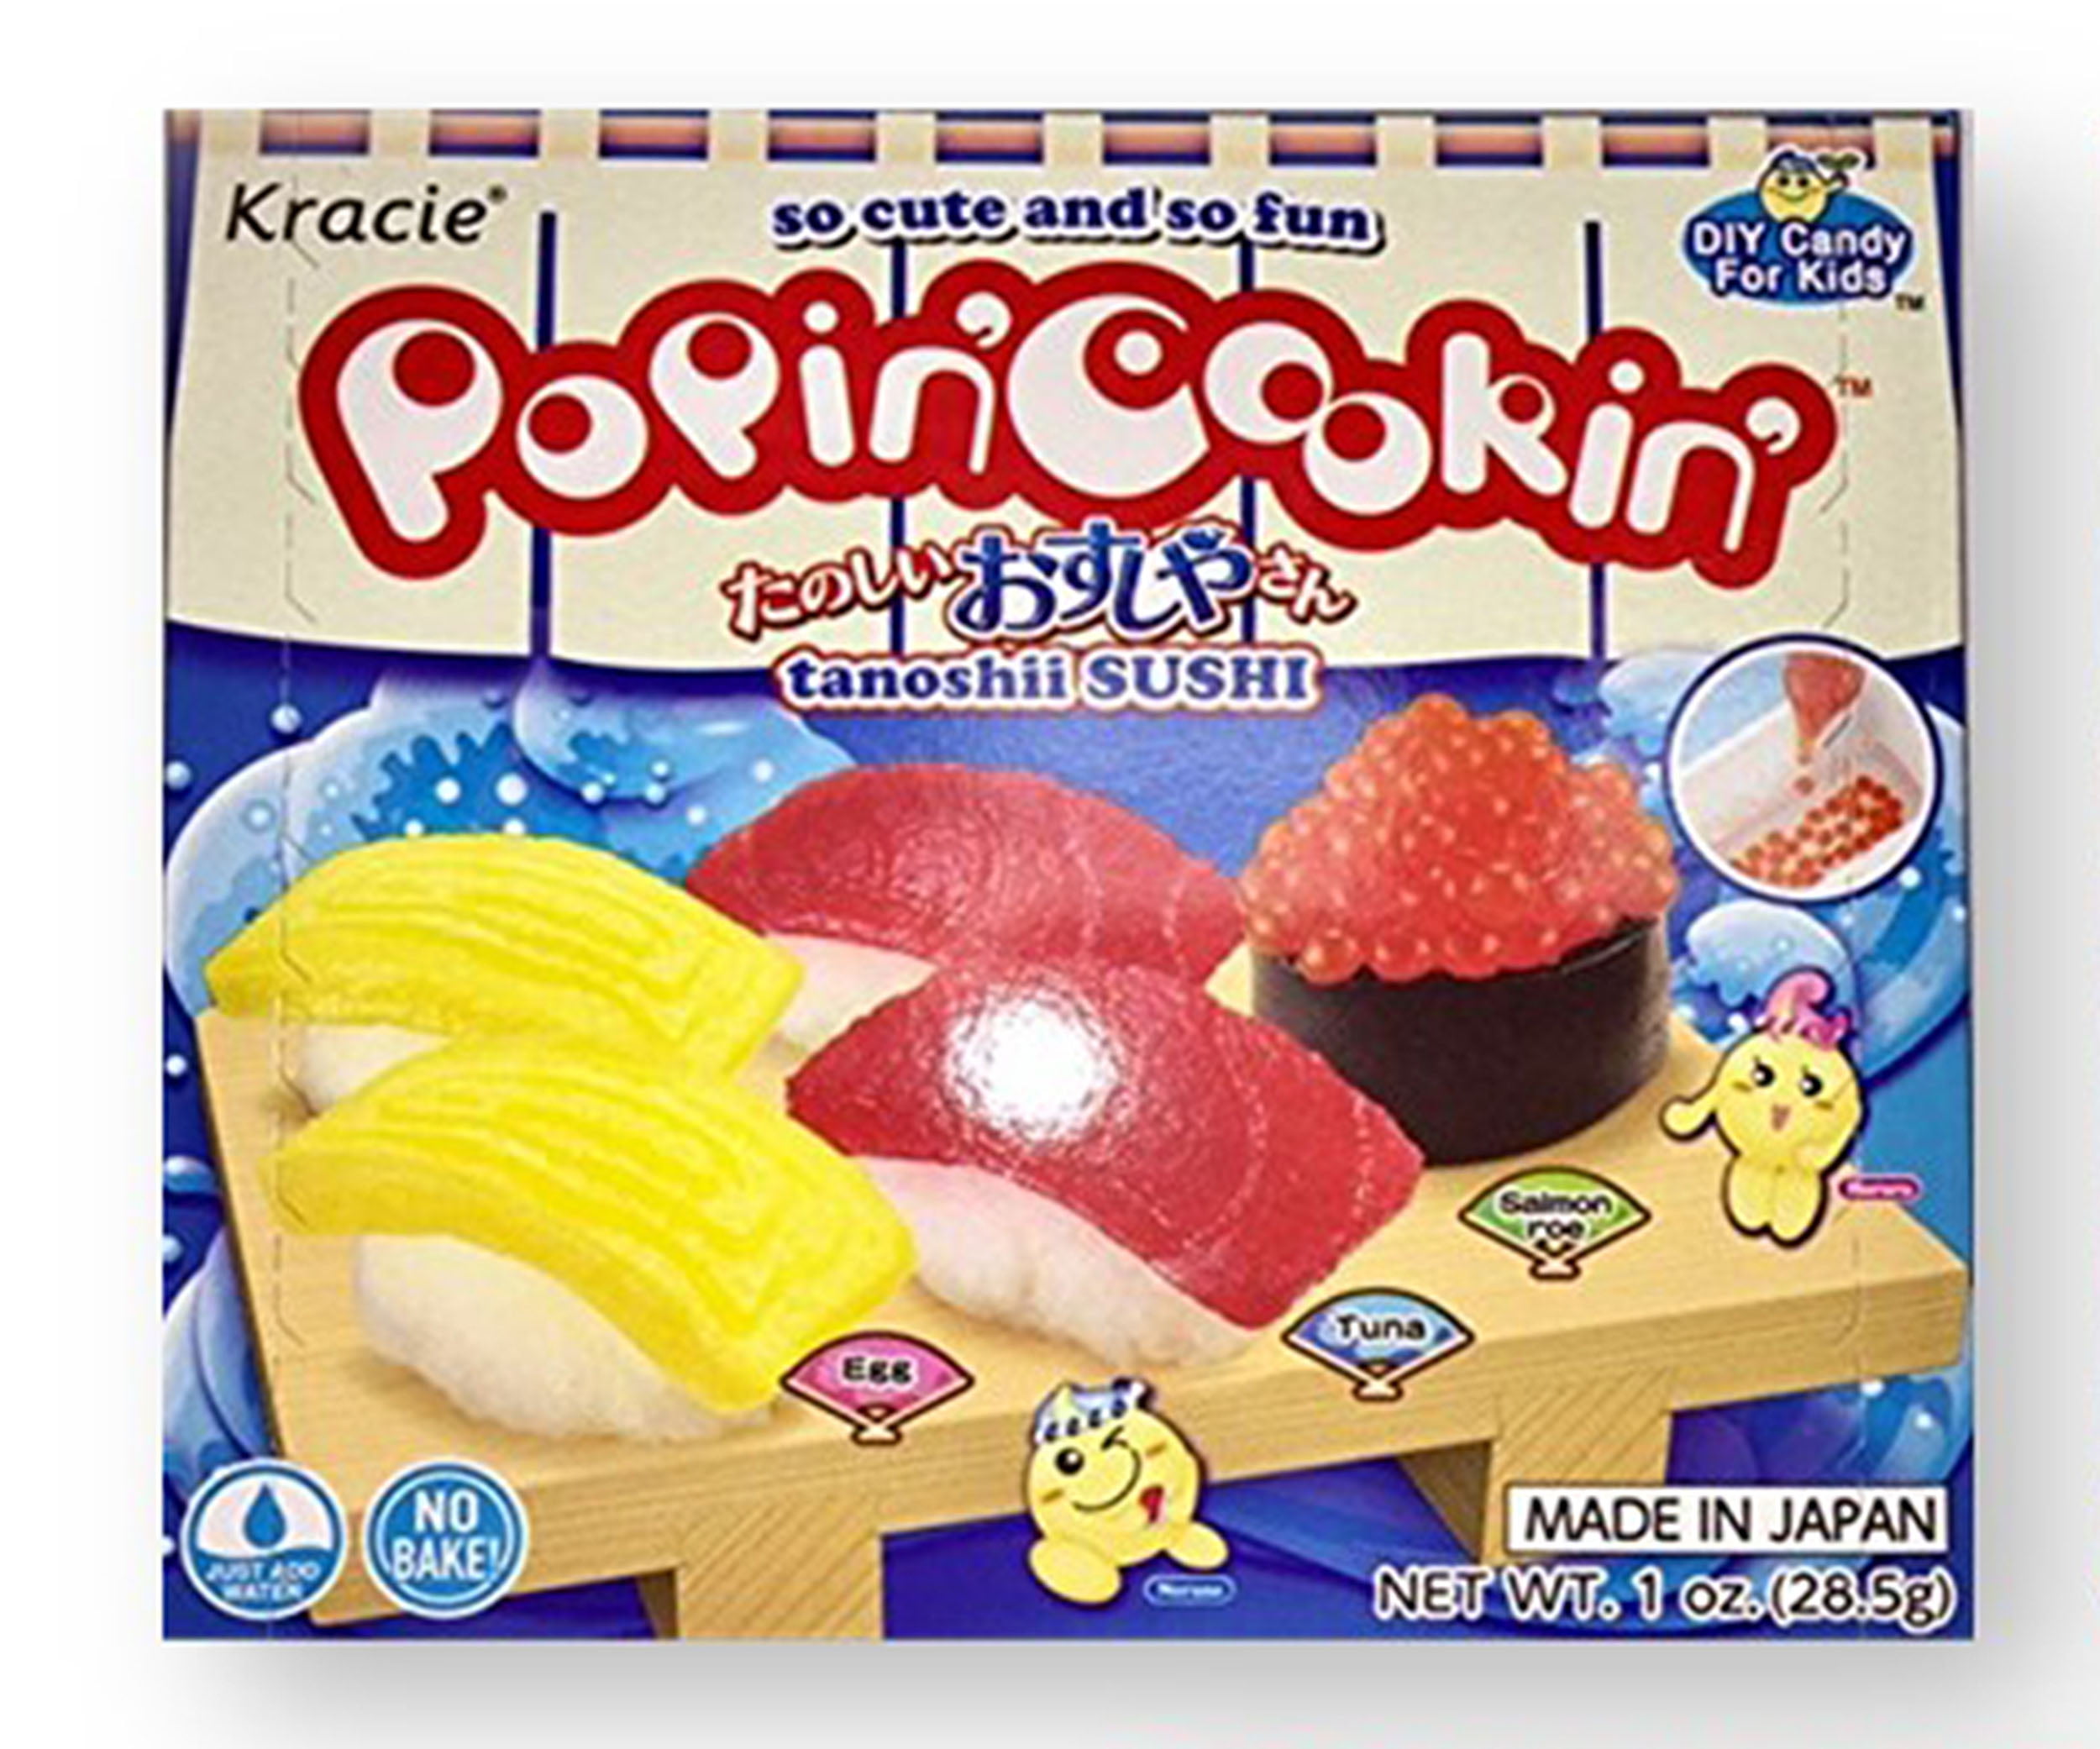 DIY Kracie Popin Cook candy dough Toys.Sushi Pizza happy kitchen Japanese  food candy snacks making kit rame d11 - AliExpress